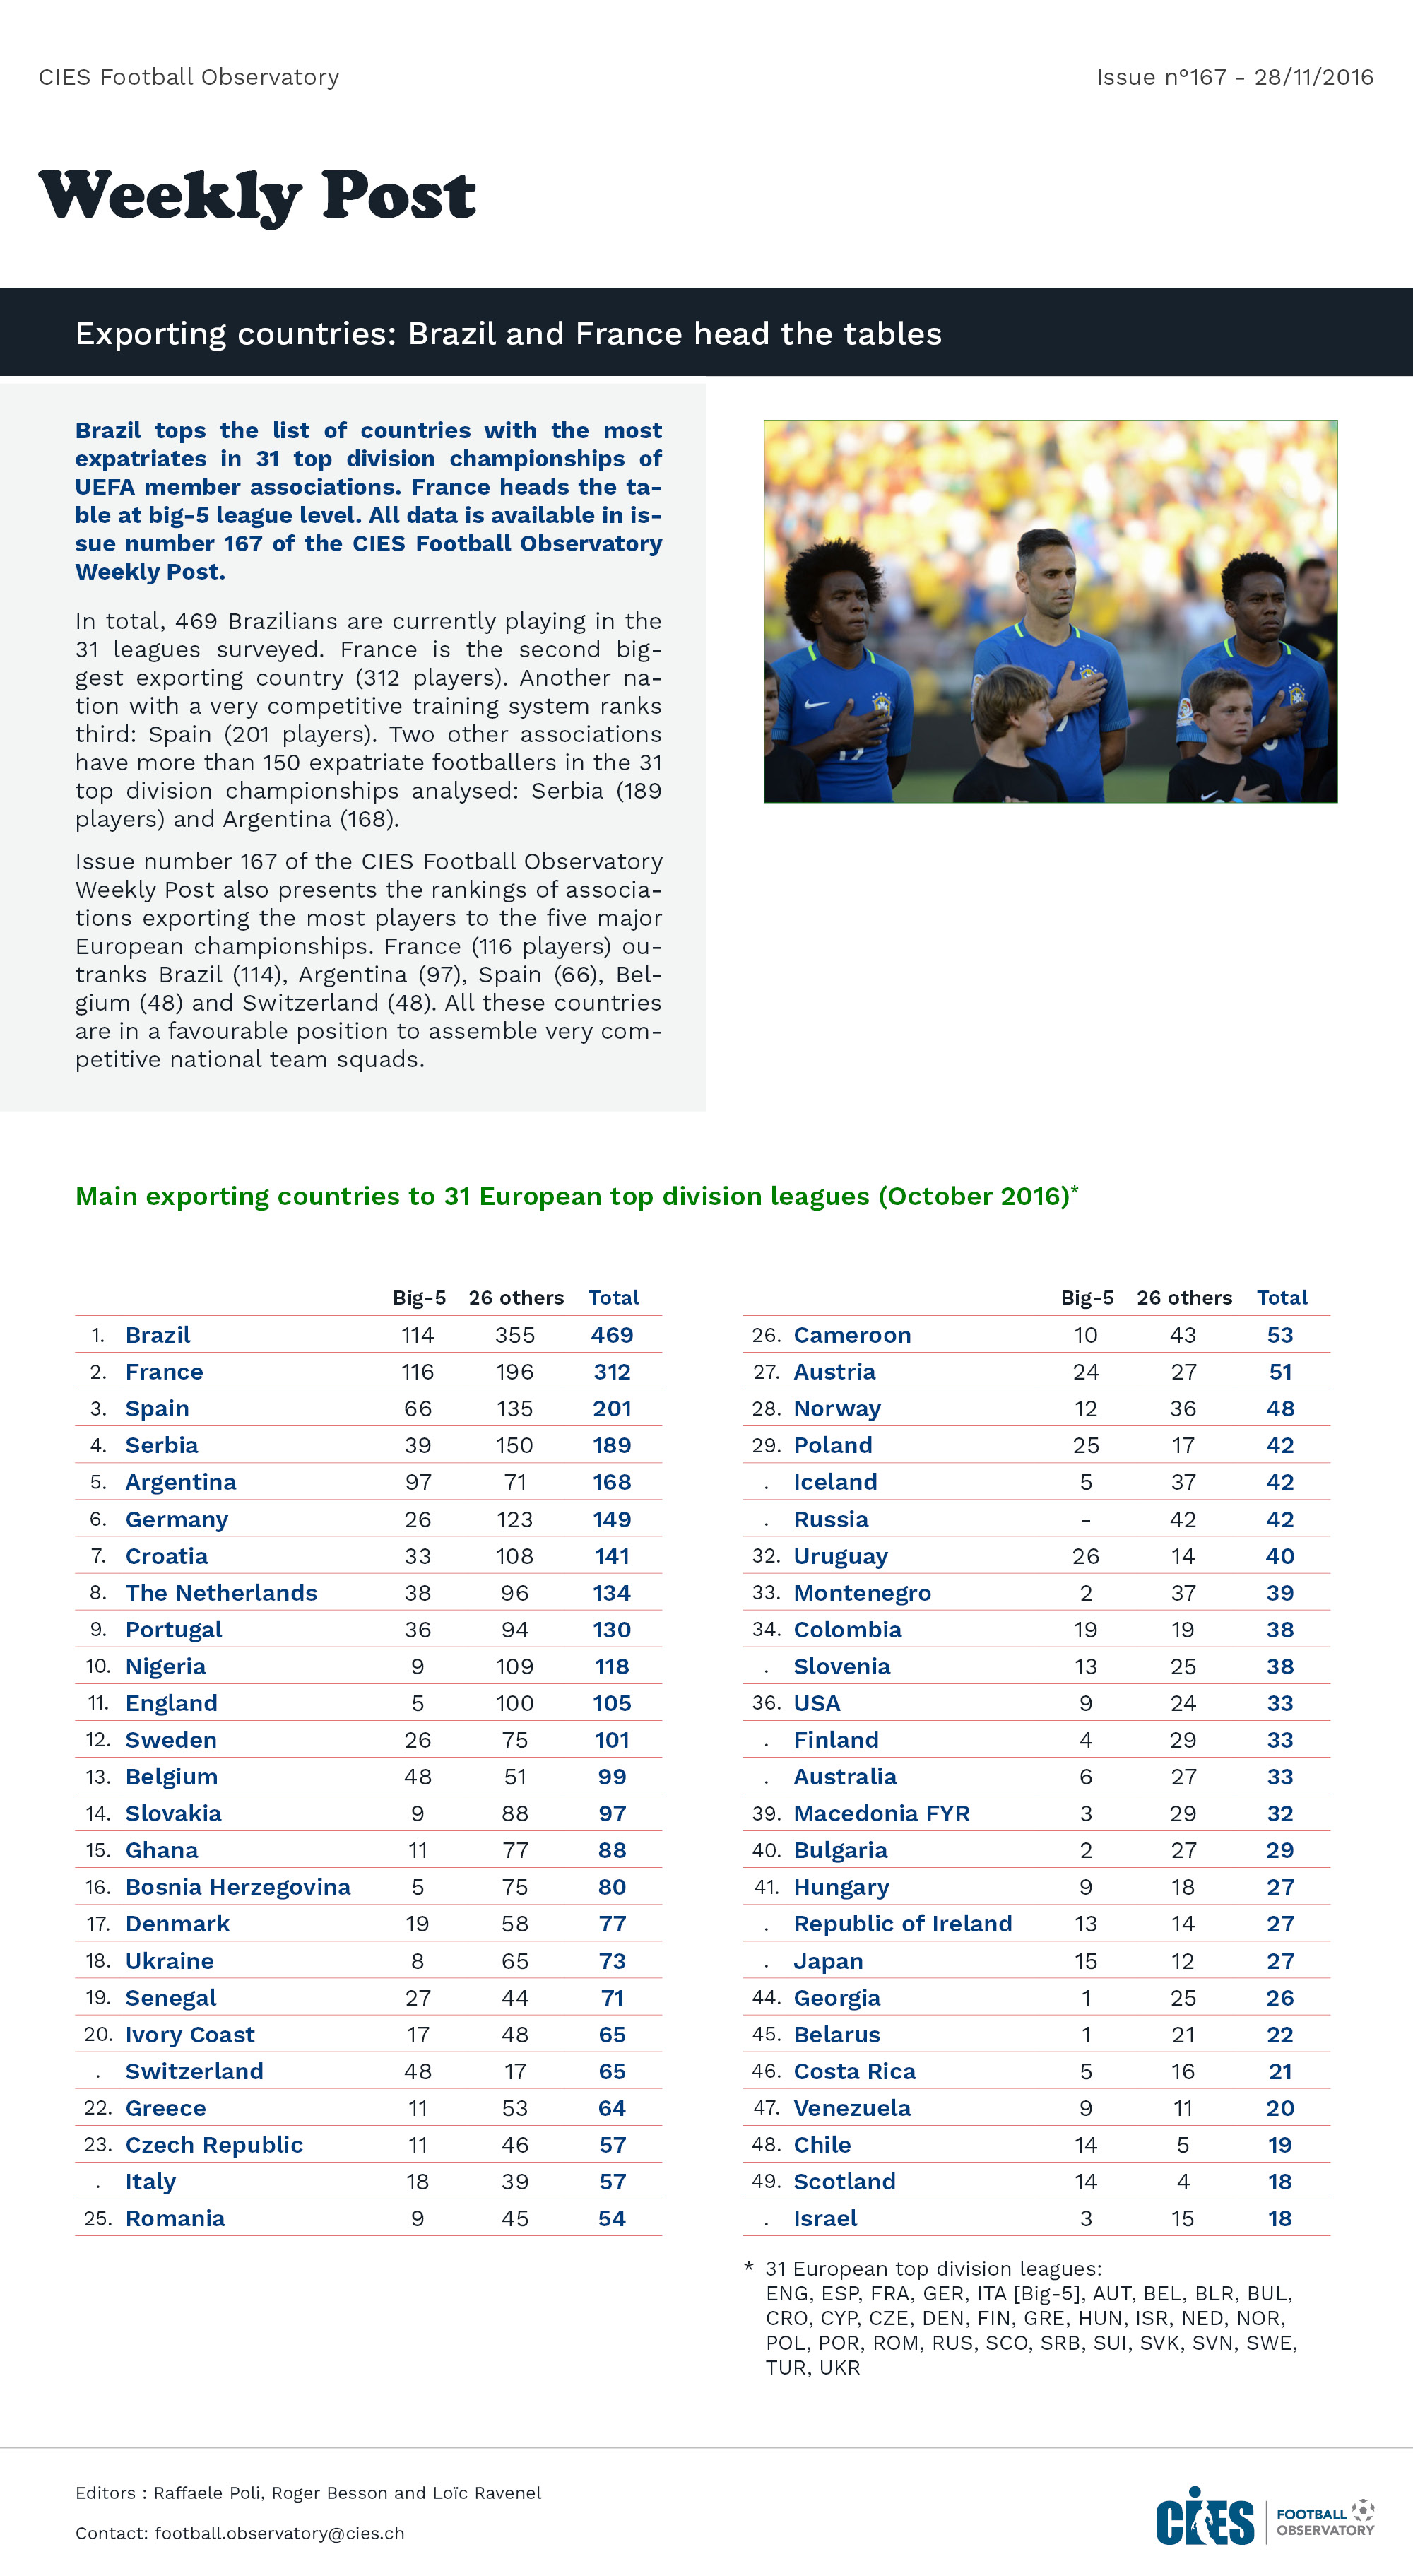 Rankings: Main exporting countries to 31 European top division leagues (October 2016)